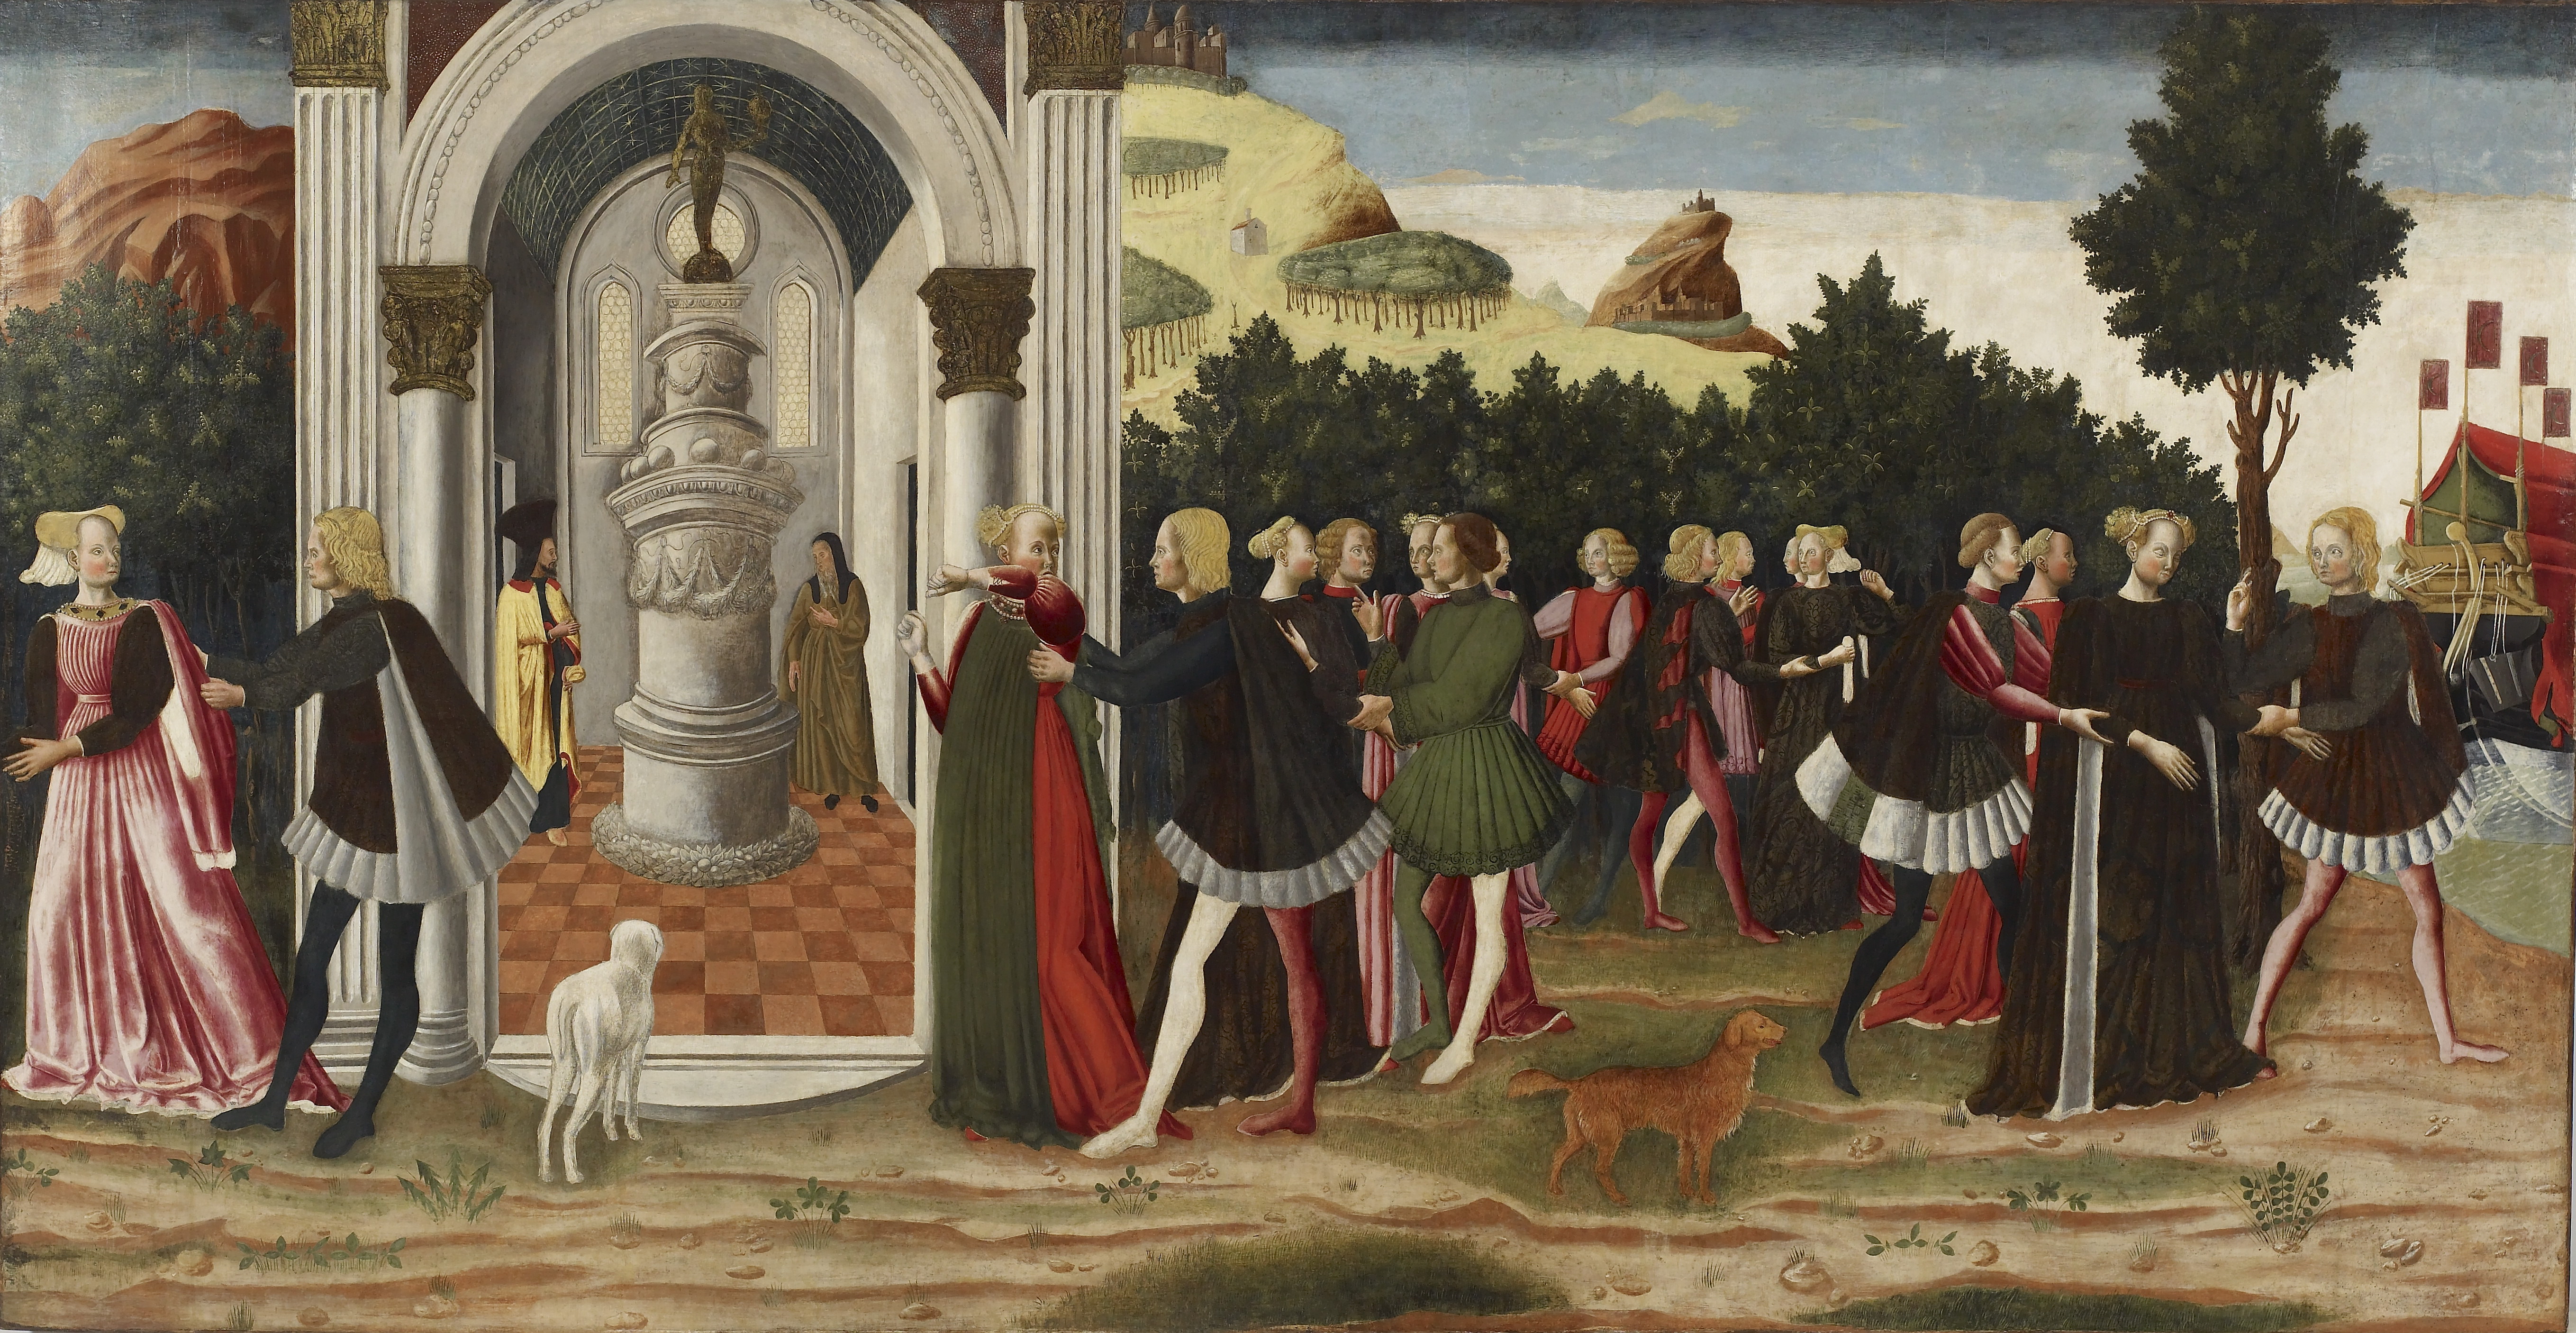 The Abduction of Helen A Monumental Series Celebrating the Wedding of Caterina Corner in 1468 pic